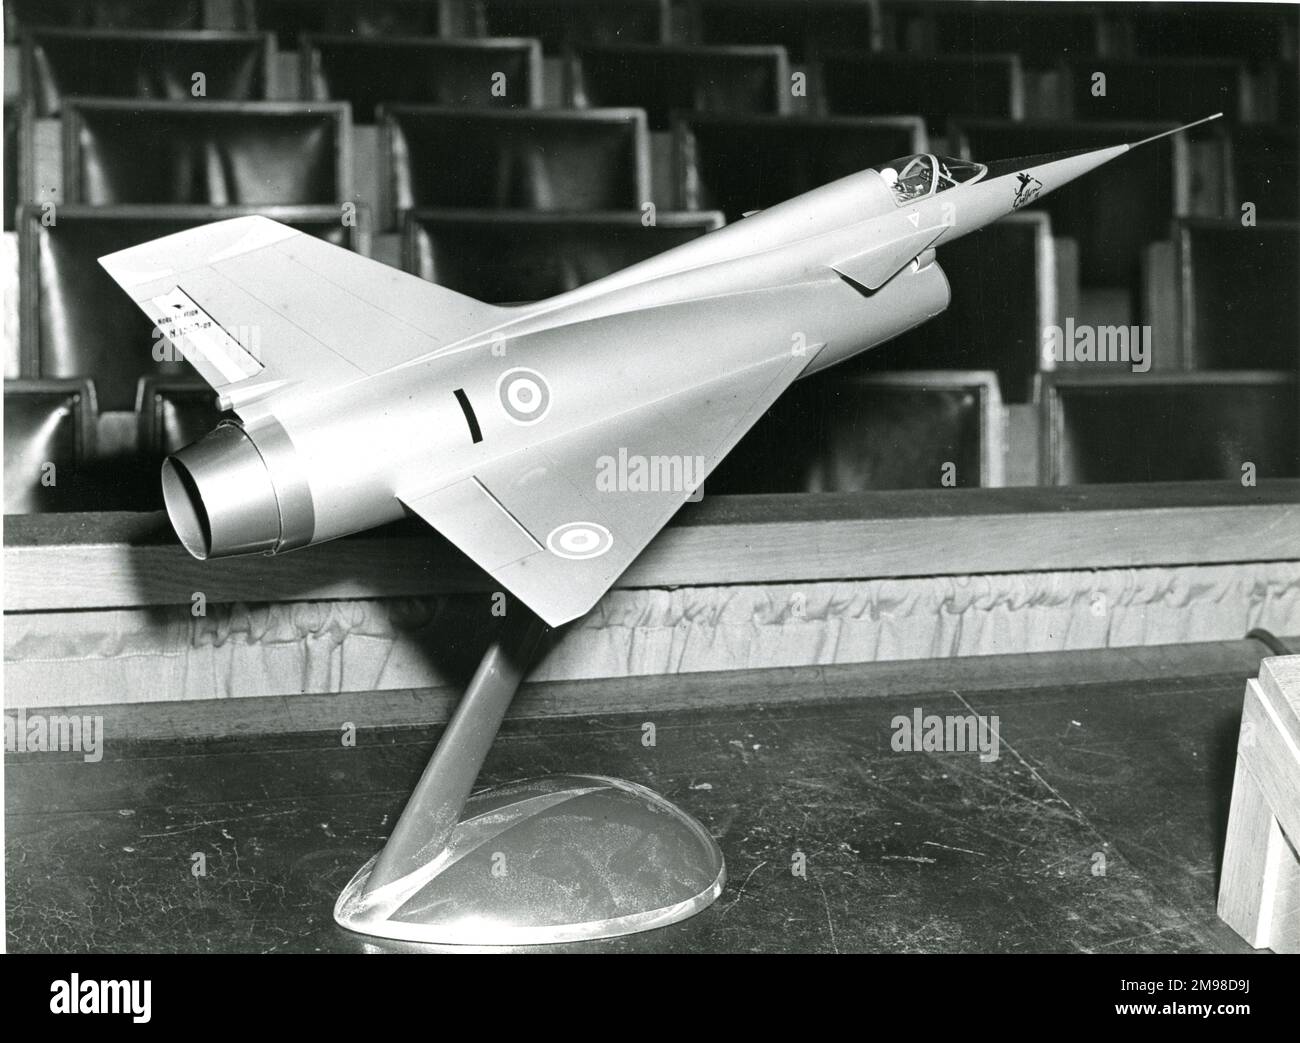 A model of the Nord Griffon at the 12th Louis Bl‚riot Lecture on 12 March 1959 at the Institution of Mechanical Engineers, Birdcage walk, London. The lecture was given by General No‰l Daum, Technical Director, Nord Aviation, and entitled ?The Griffon Aircraft and the Future of the Turbo-Ram-Jet Combination in the Propulsion of Supersonic Aeroplanes? and was given in the presence of Madame Bl‚riot. Stock Photo